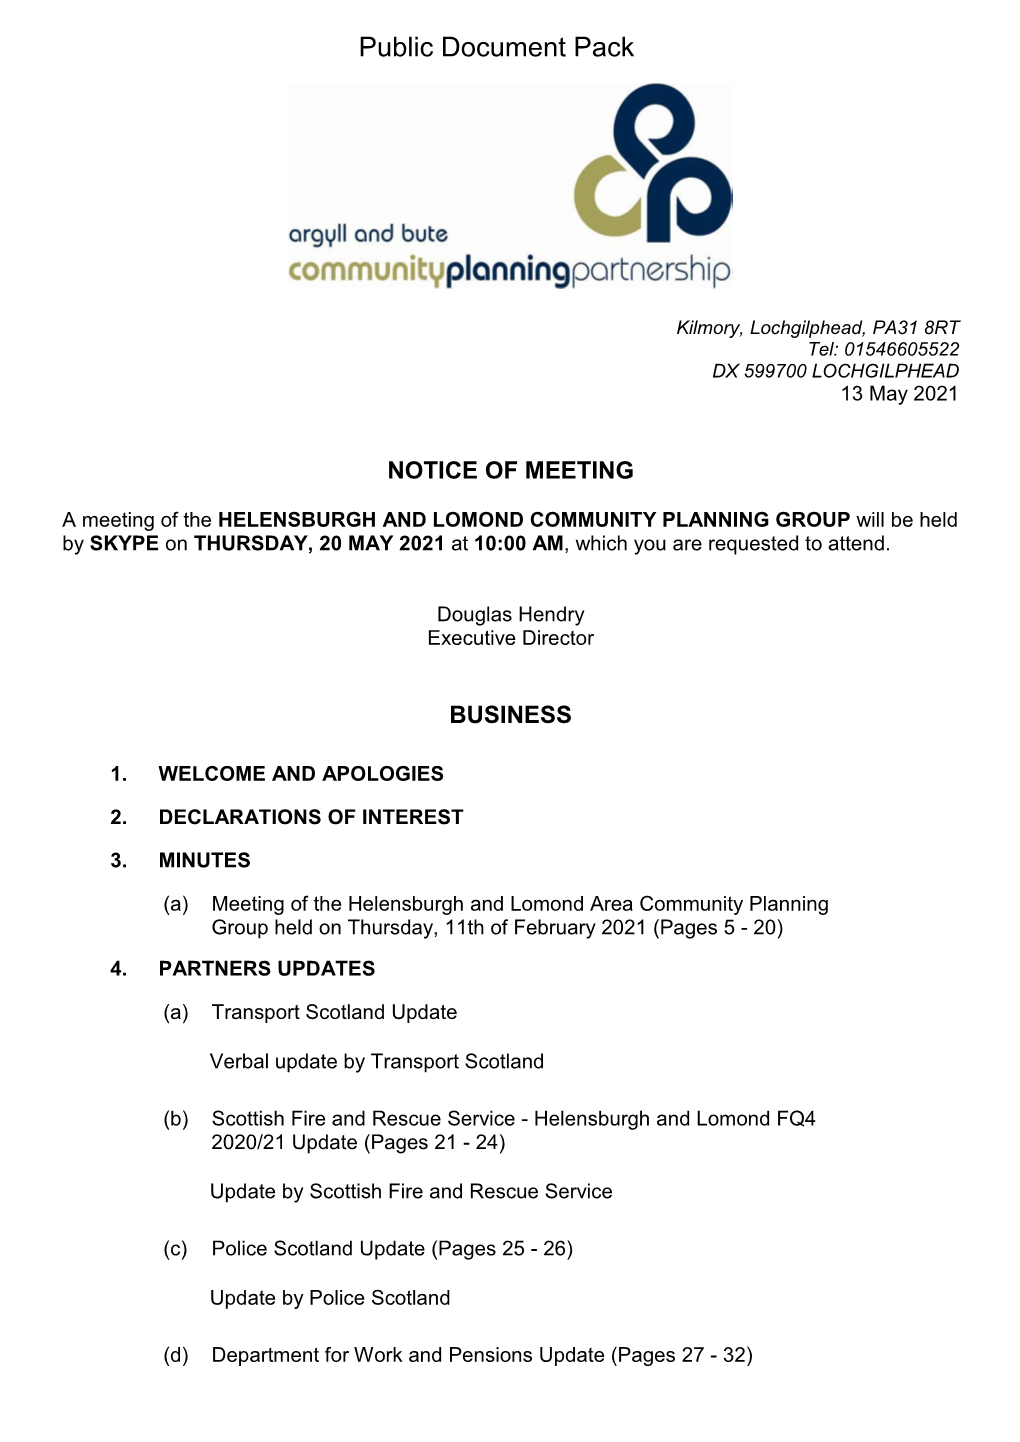 (Public Pack)Agenda Document for Helensburgh and Lomond Community Planning Group, 20/05/2021 10:00